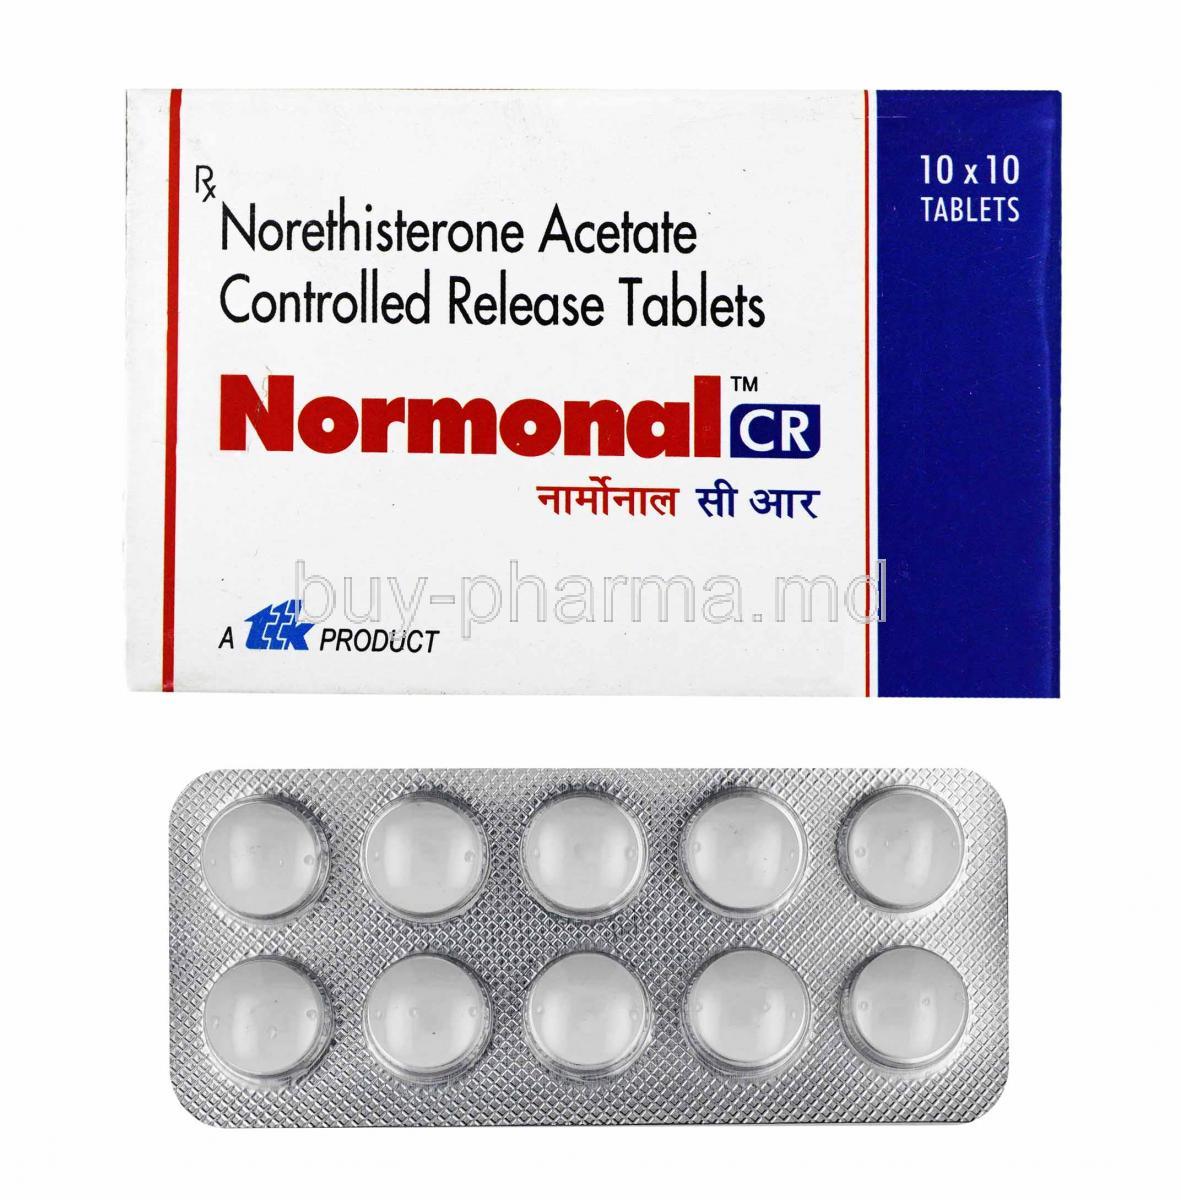 Normonal, Norethisterone box and tablets